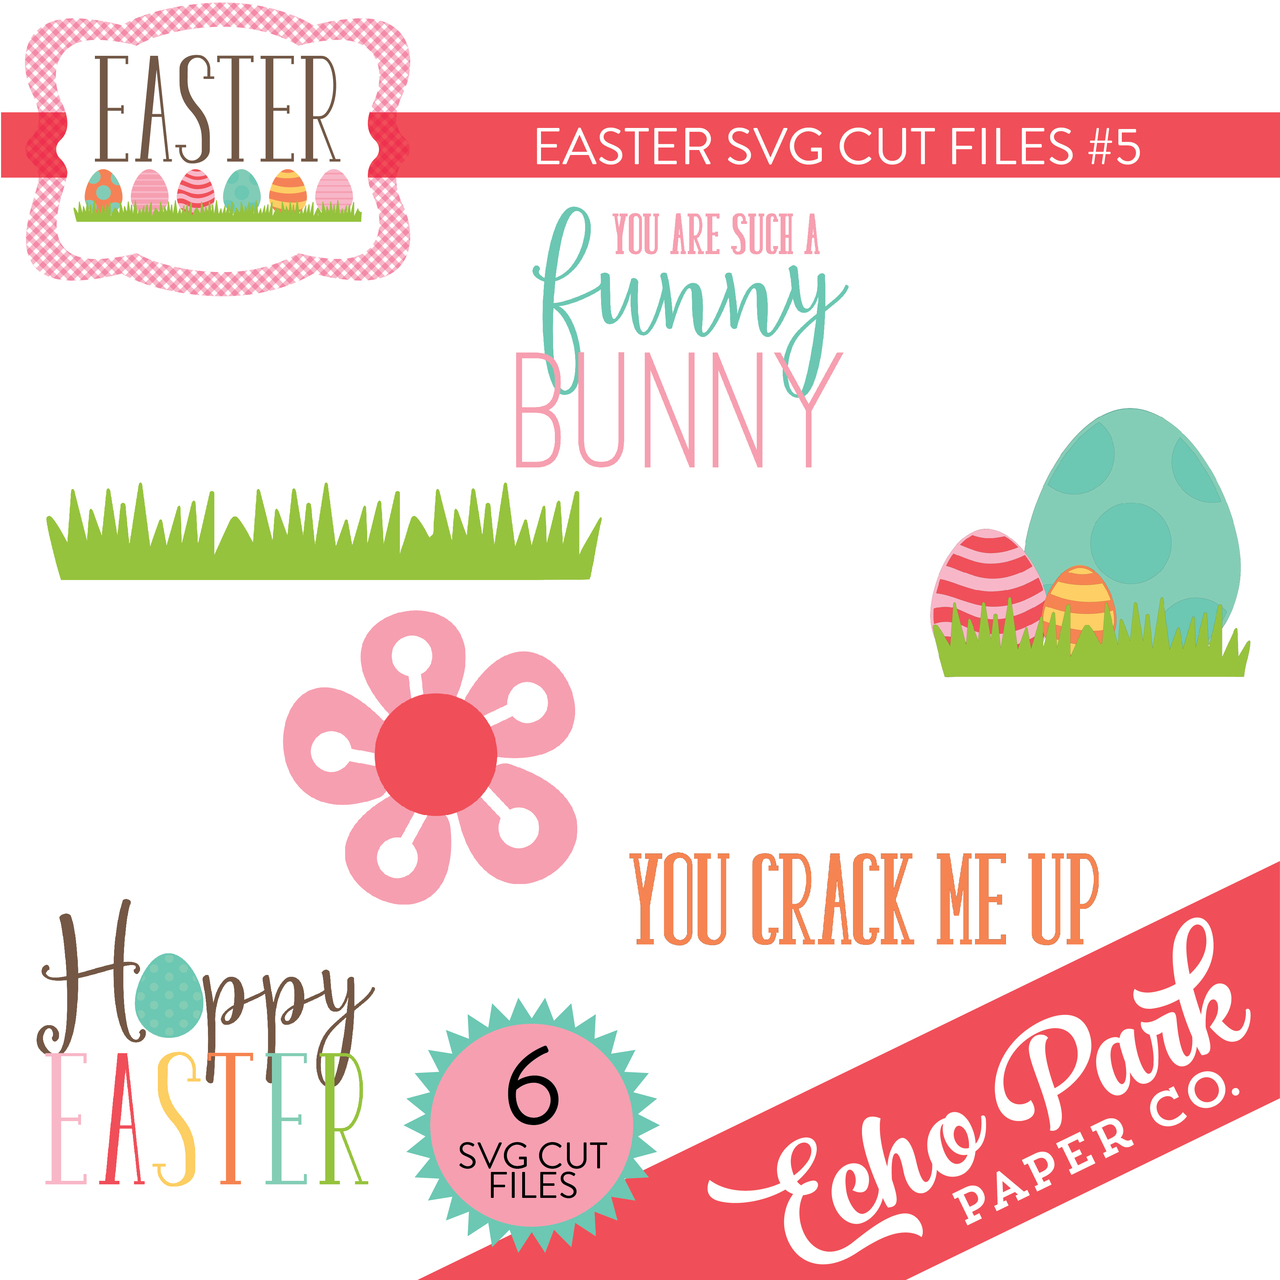 Easter SVG Cut Files #5